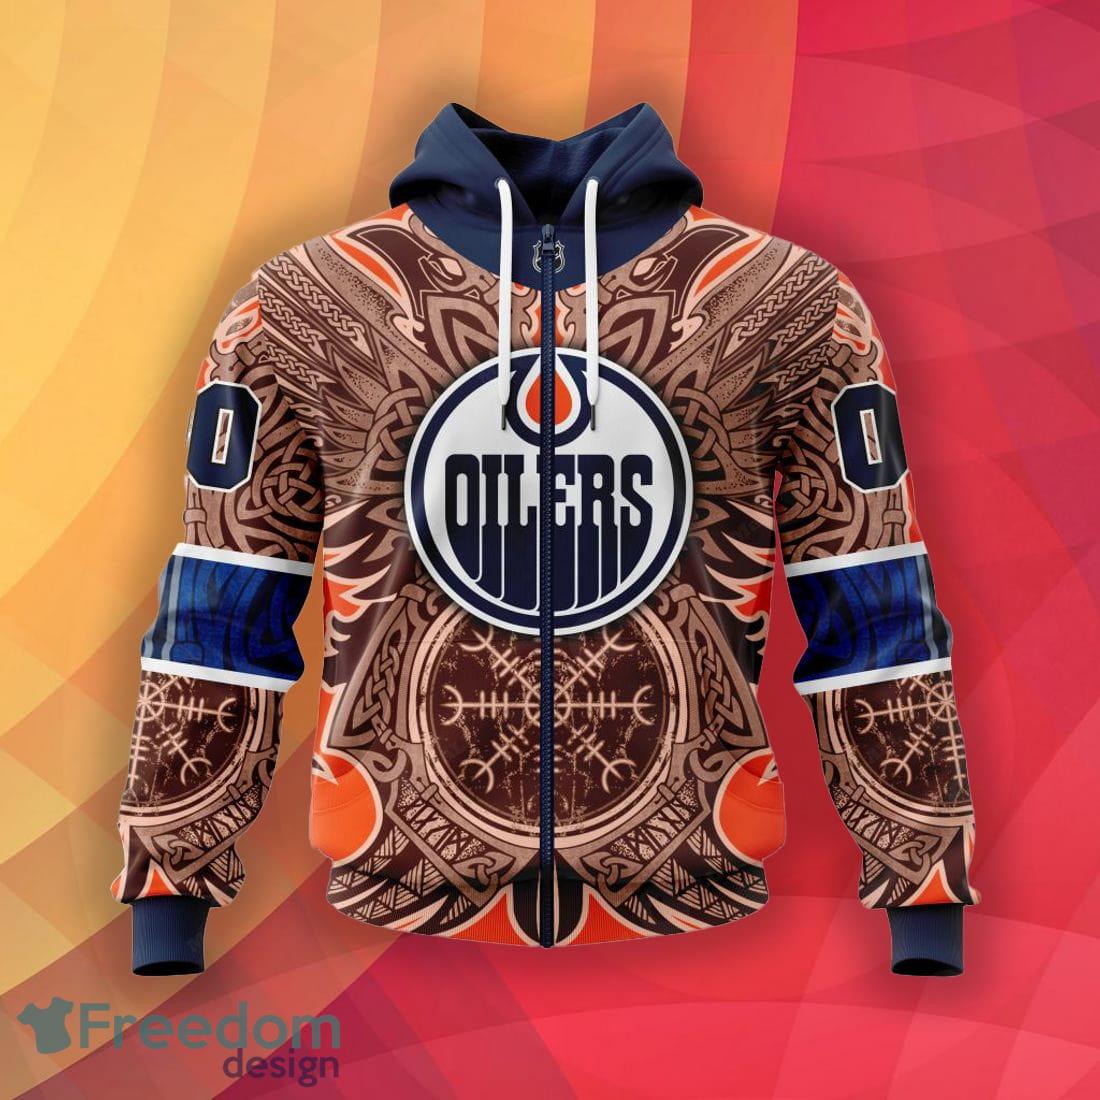 Edmonton Oilers Personalized Name 3D Tshirt Ideal Gift For Men And Women  Fans - Freedomdesign